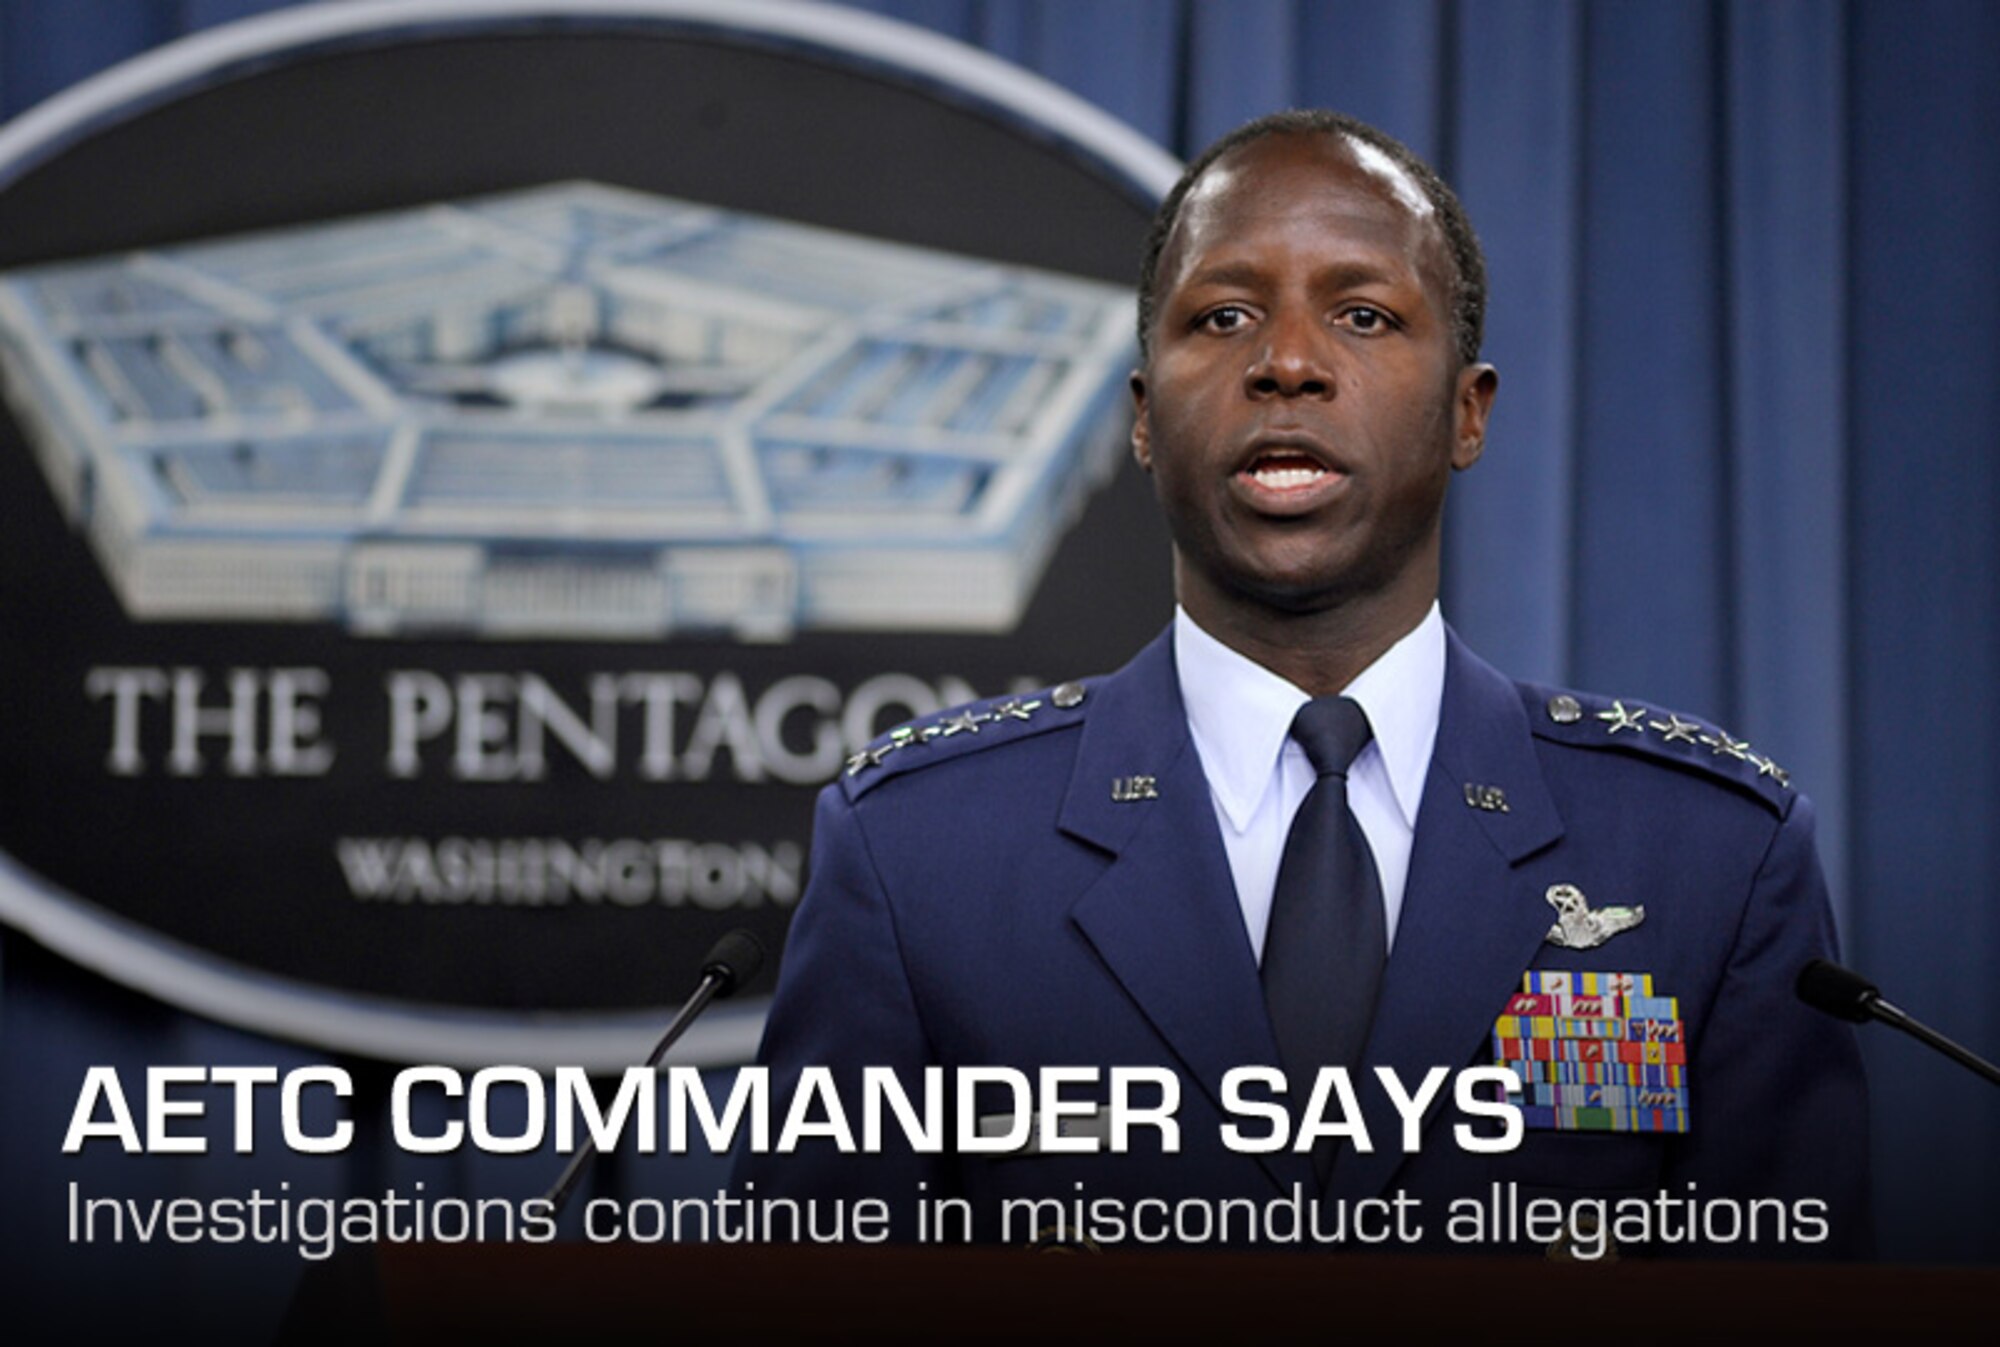 Gen. Edward Rice Jr., Commander, Air Education and Training Command, gives a press briefing on allegations of sexual misconduct involving basic military training instructors at Lackland Air Force Base in the Pentagon on June 28, 2012.  An investigation since June 2011 into the allegations is still ongoing.  (U.S. Air Force photo/Scott M. Ash)